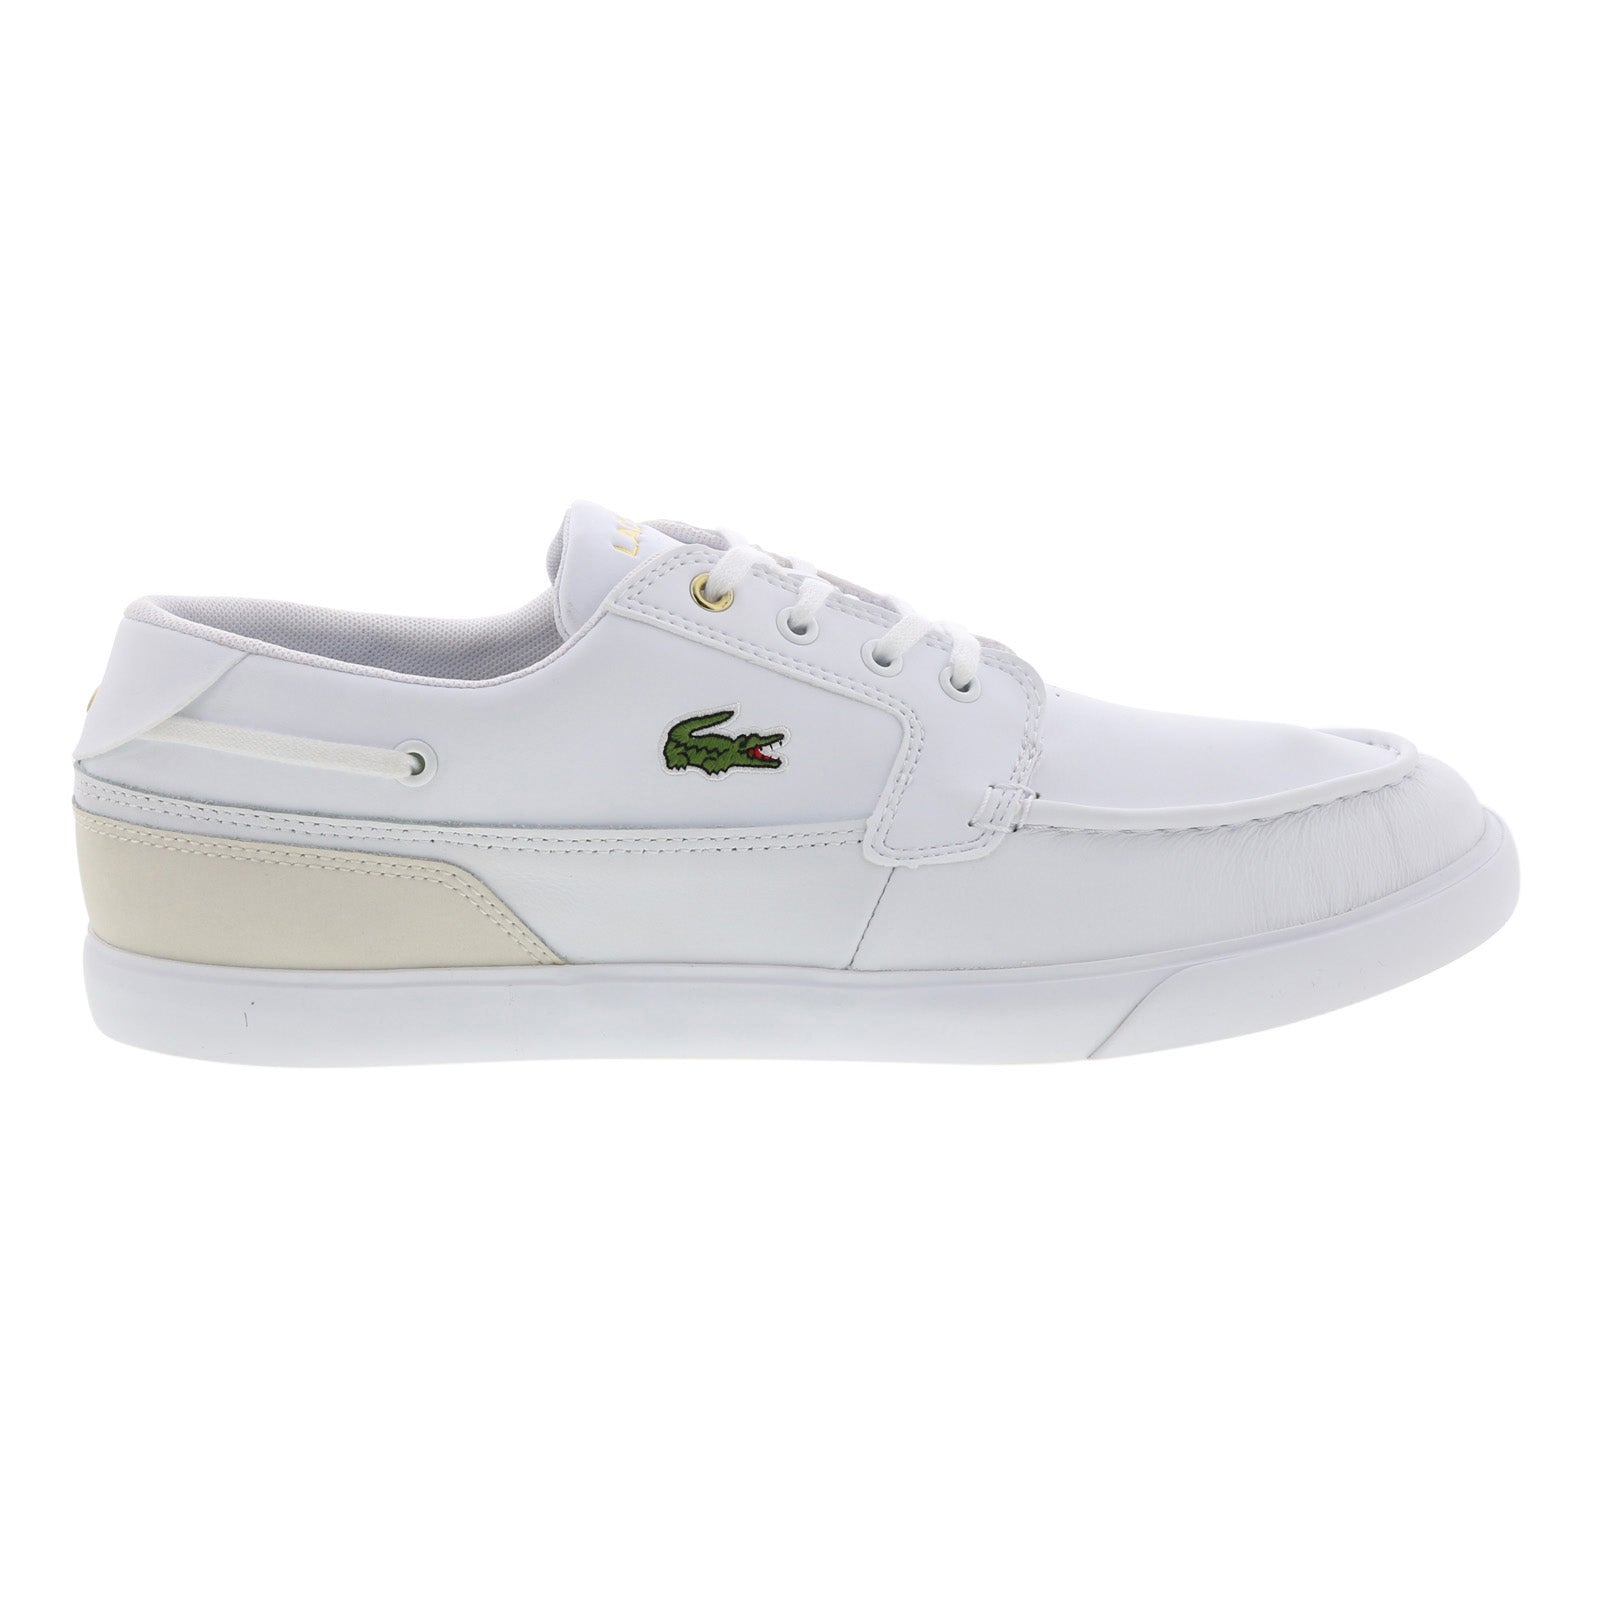 telex kampagne stewardesse Lacoste Bayliss Deck 0722 1 Mens White Leather Lifestyle Sneakers Shoe -  Ruze Shoes